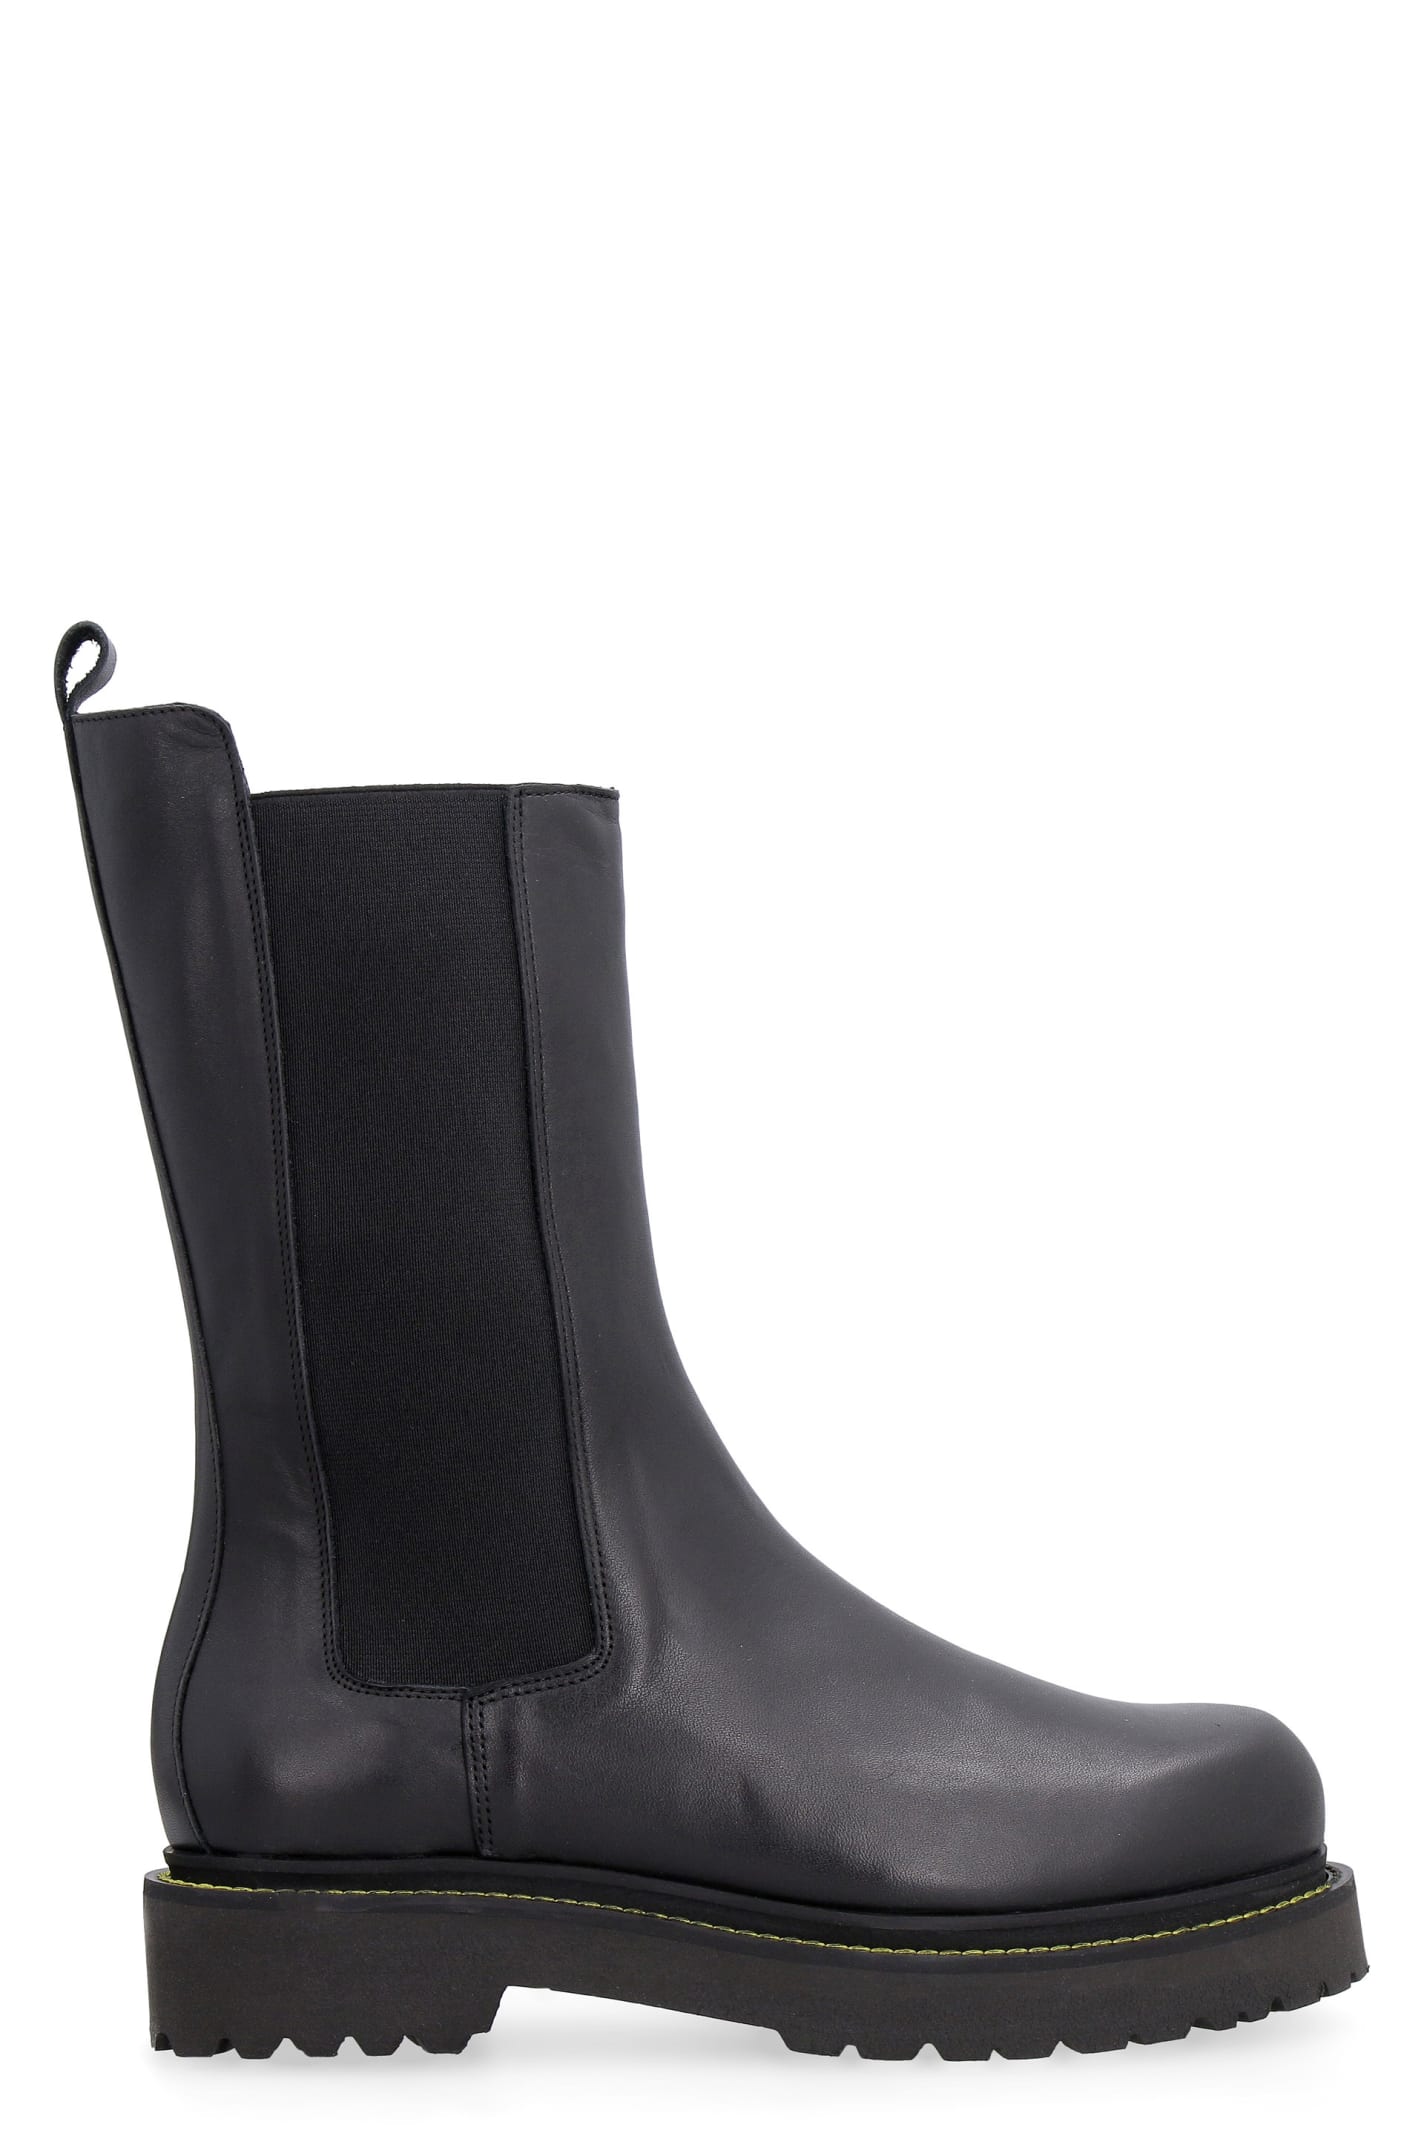 Pinko Natalie Leather Chelsea Boots